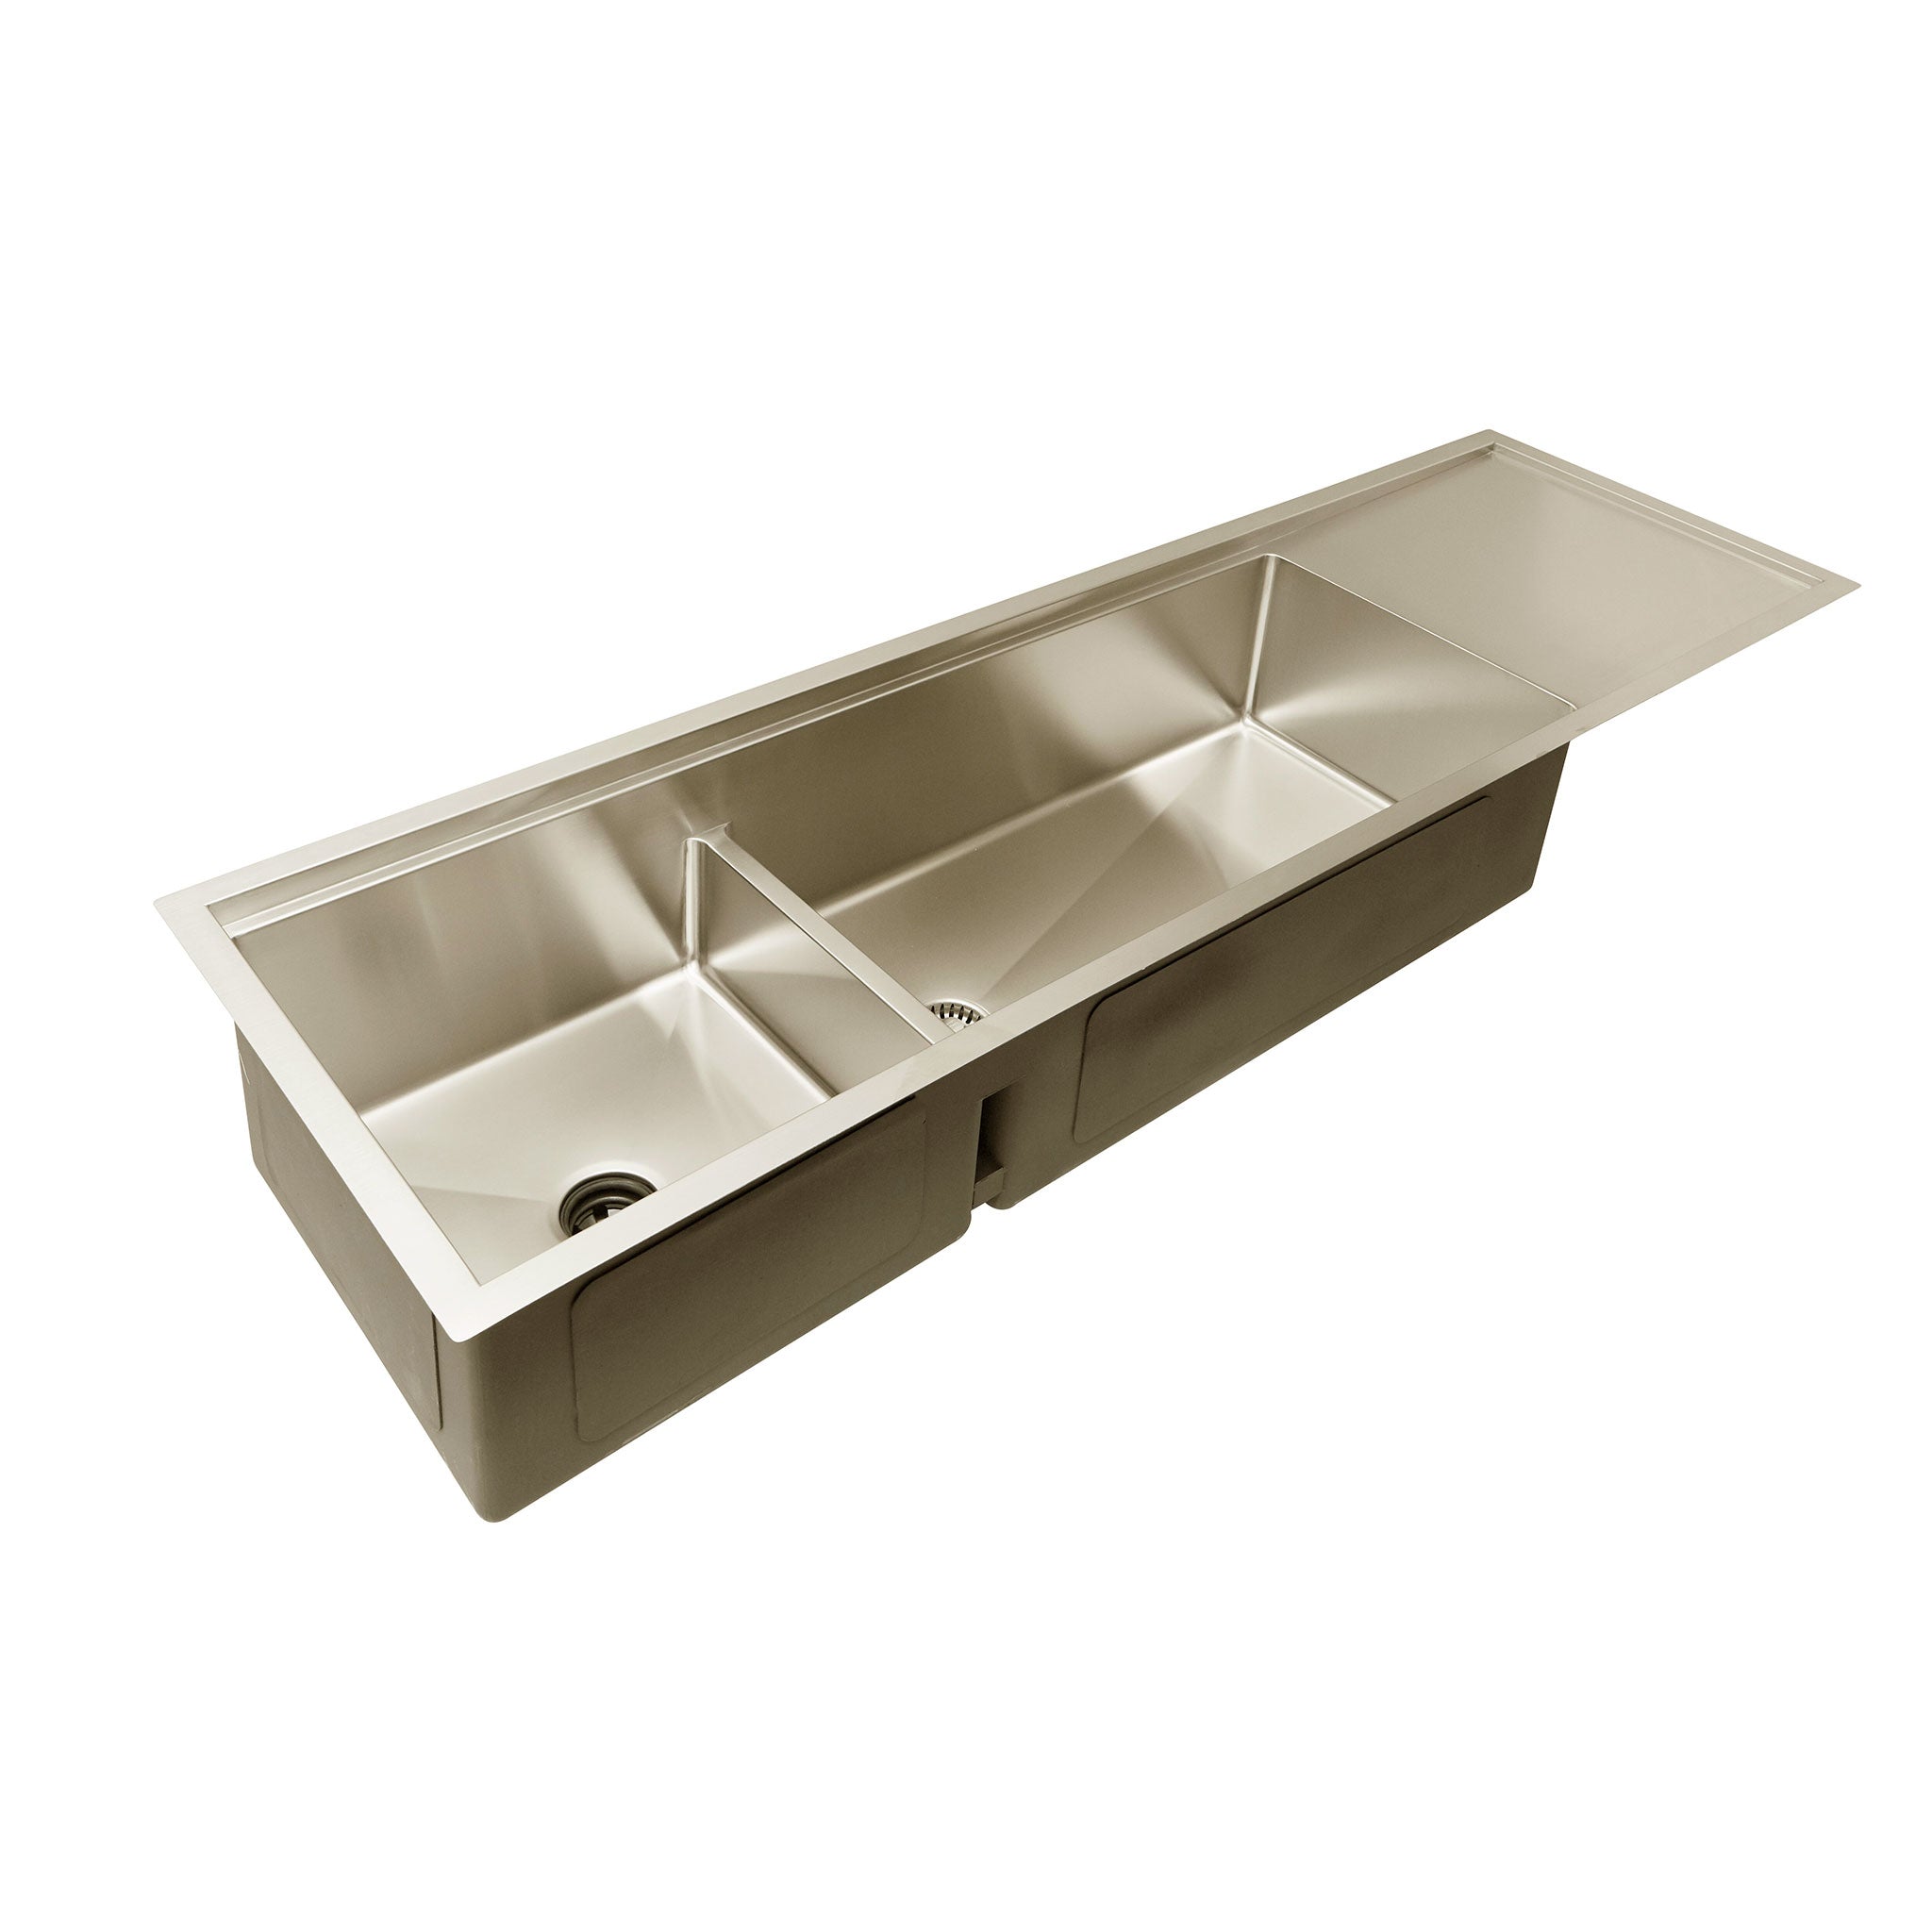 68 inch 16 gauge stainless steel undermount double basin sink with reversible drainboard and low divider